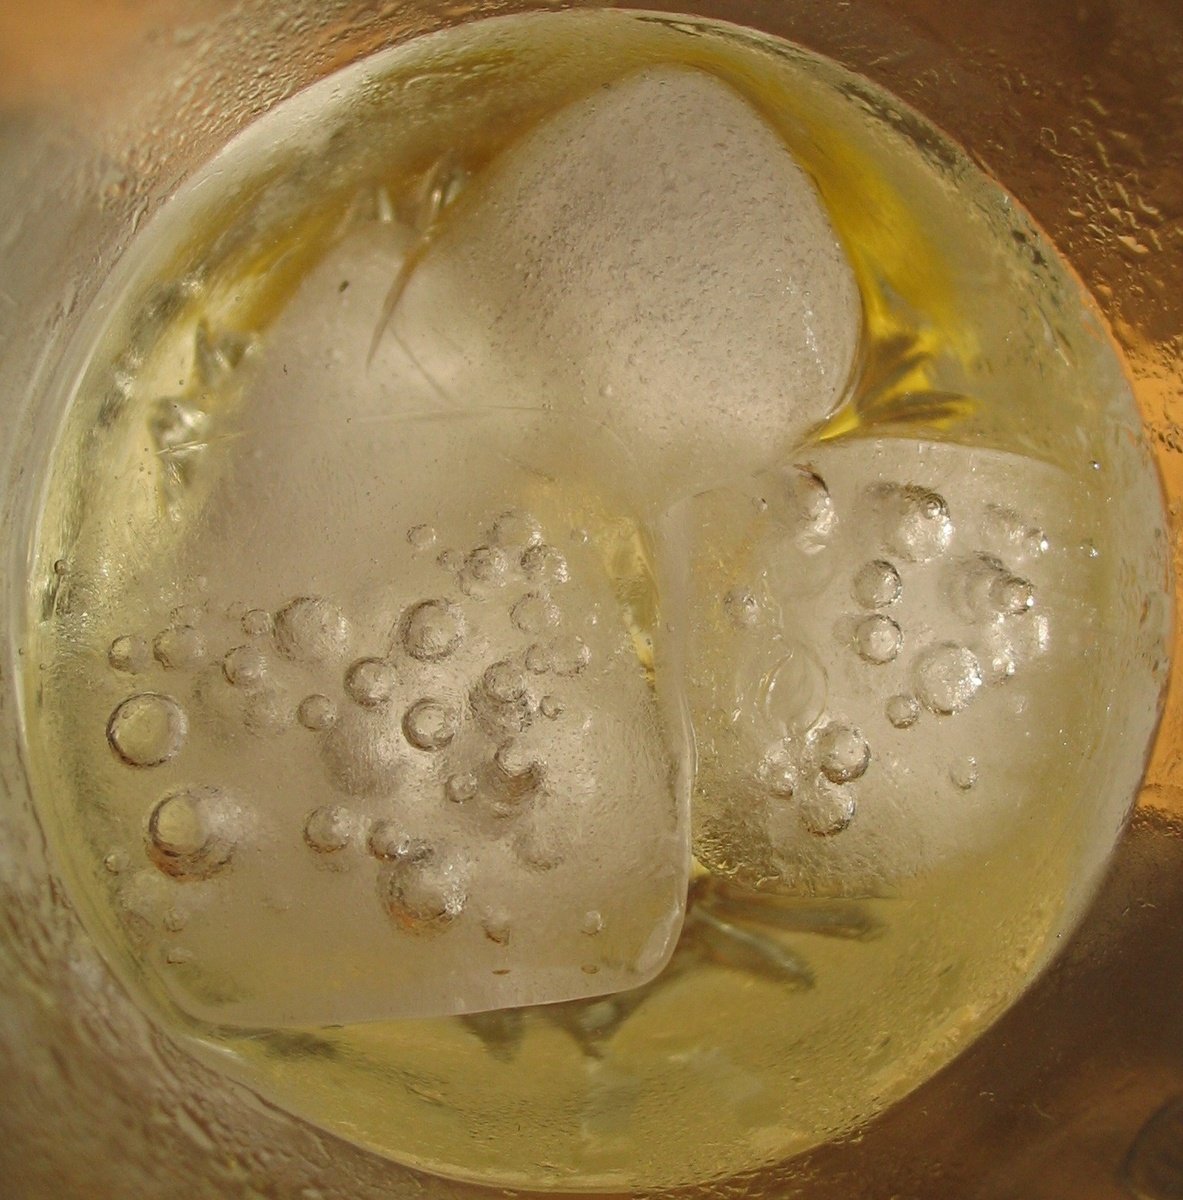 ice cubes on a glass of liquid